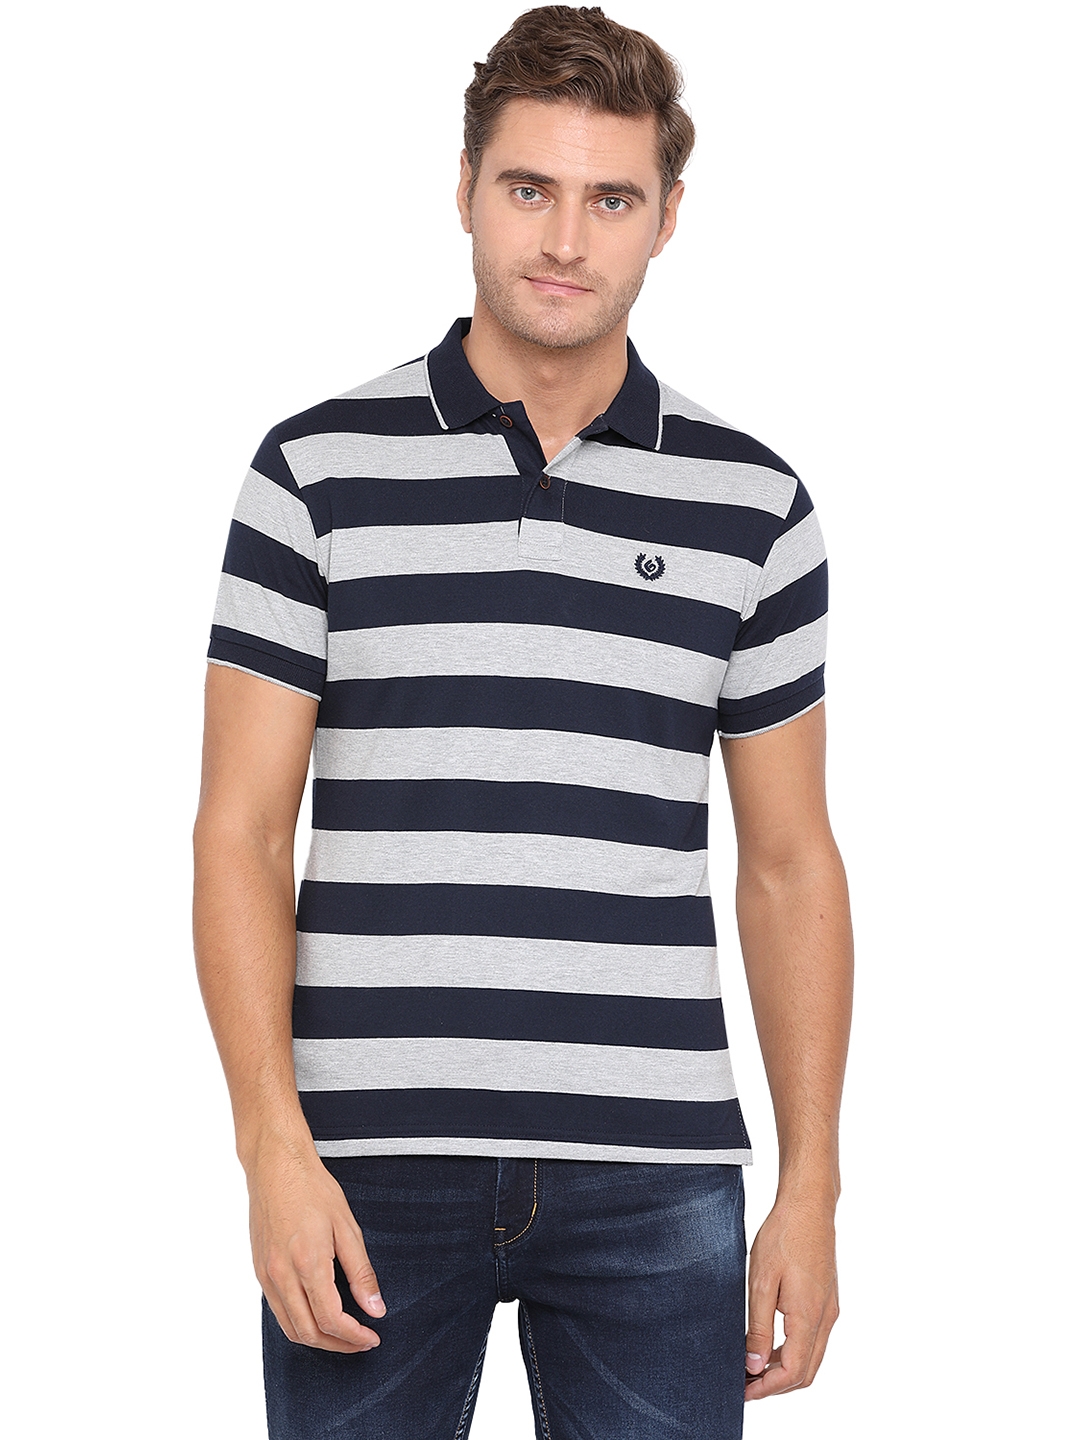 Grey & Blue Striped Slim Fit Polo T-Shirt | Greenfibre